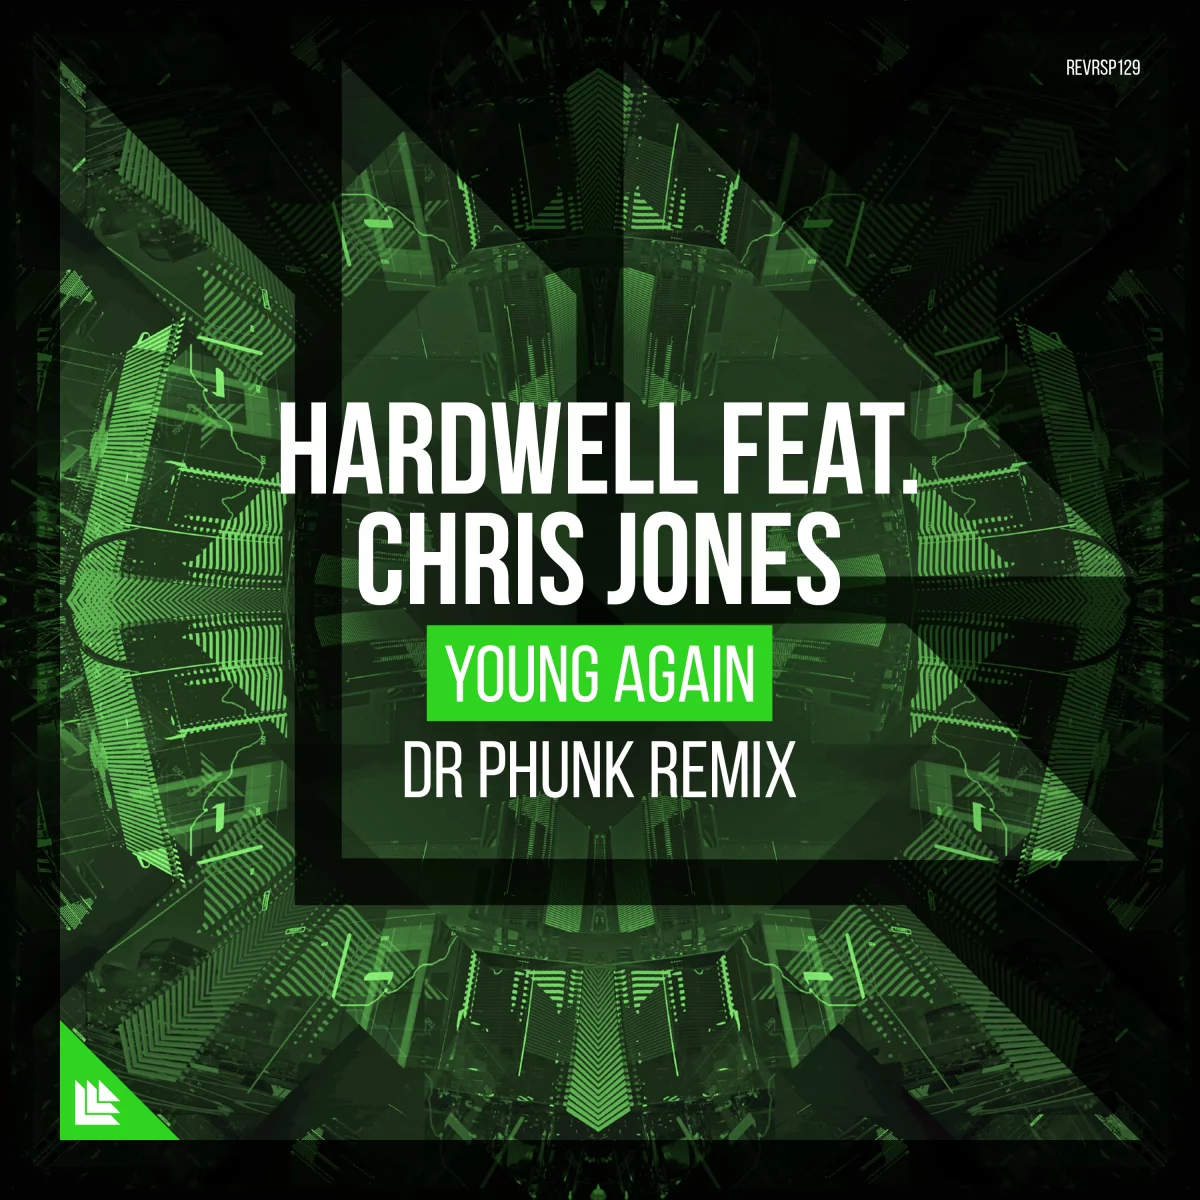 Young Again (Dr Phunk Remix) - Hardwell feat. Chris Jones